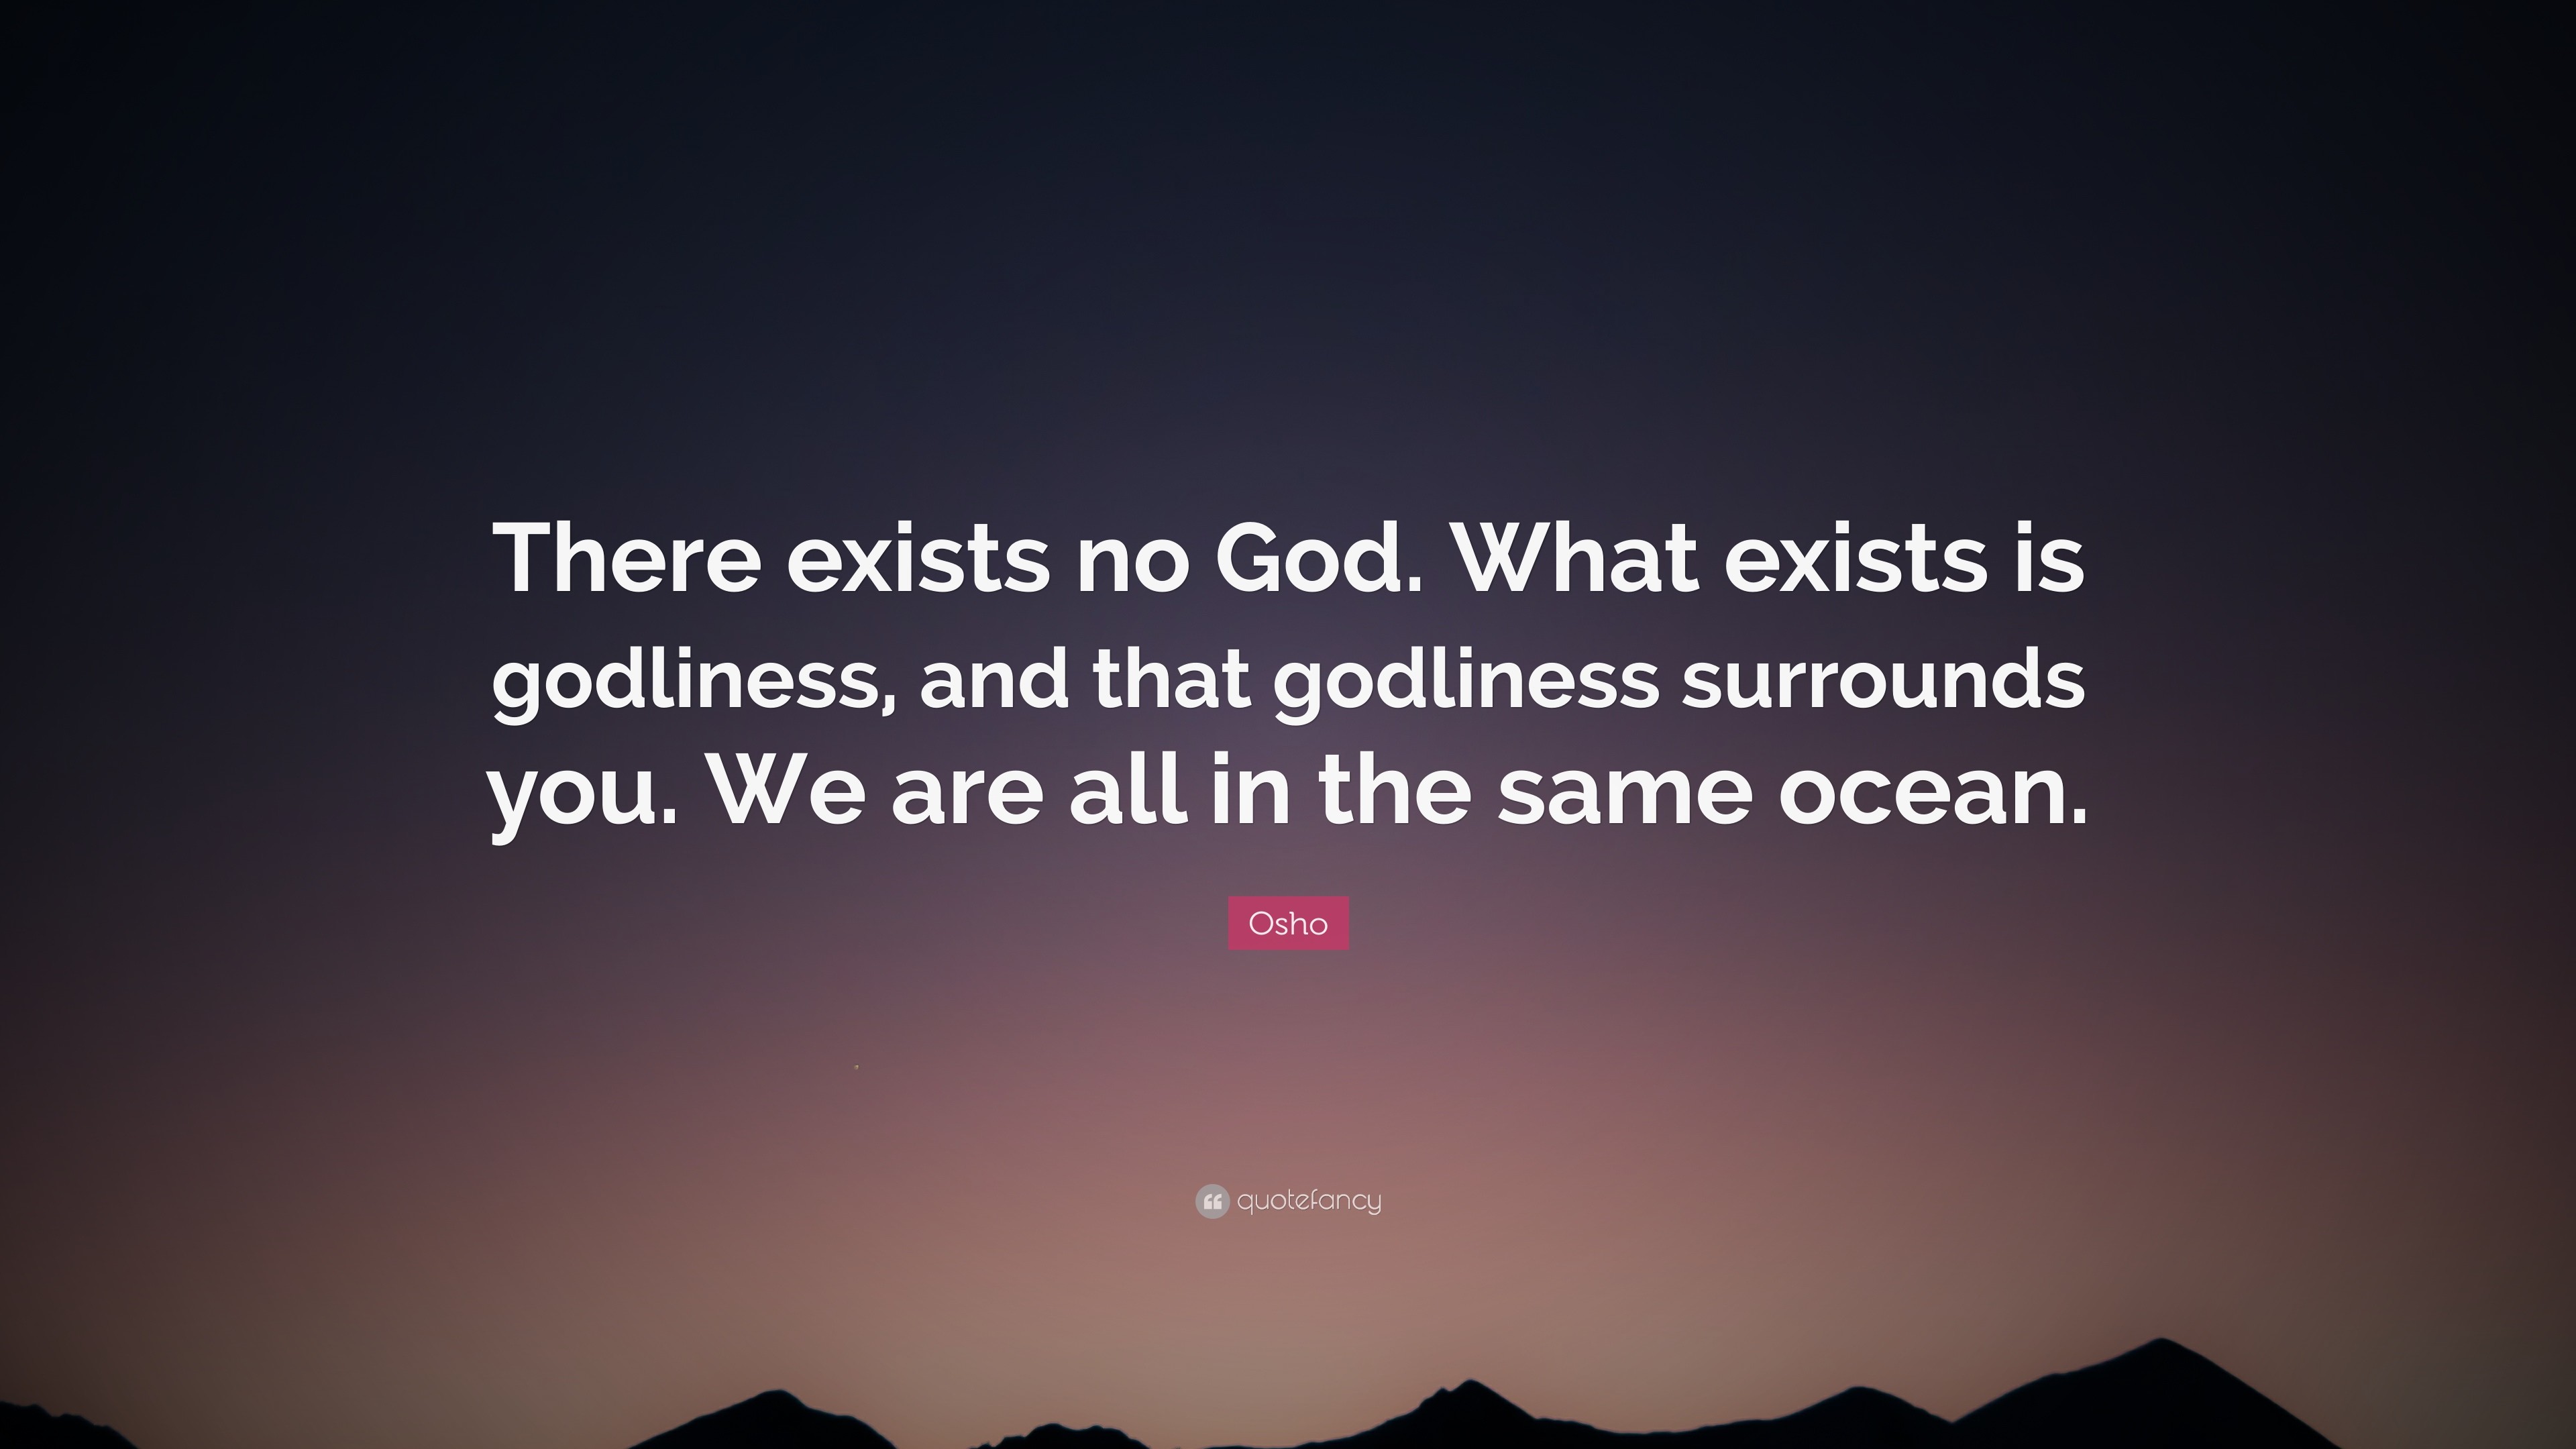 3840x2160 Osho Quote: “There exists no God. What exists is godliness, and that